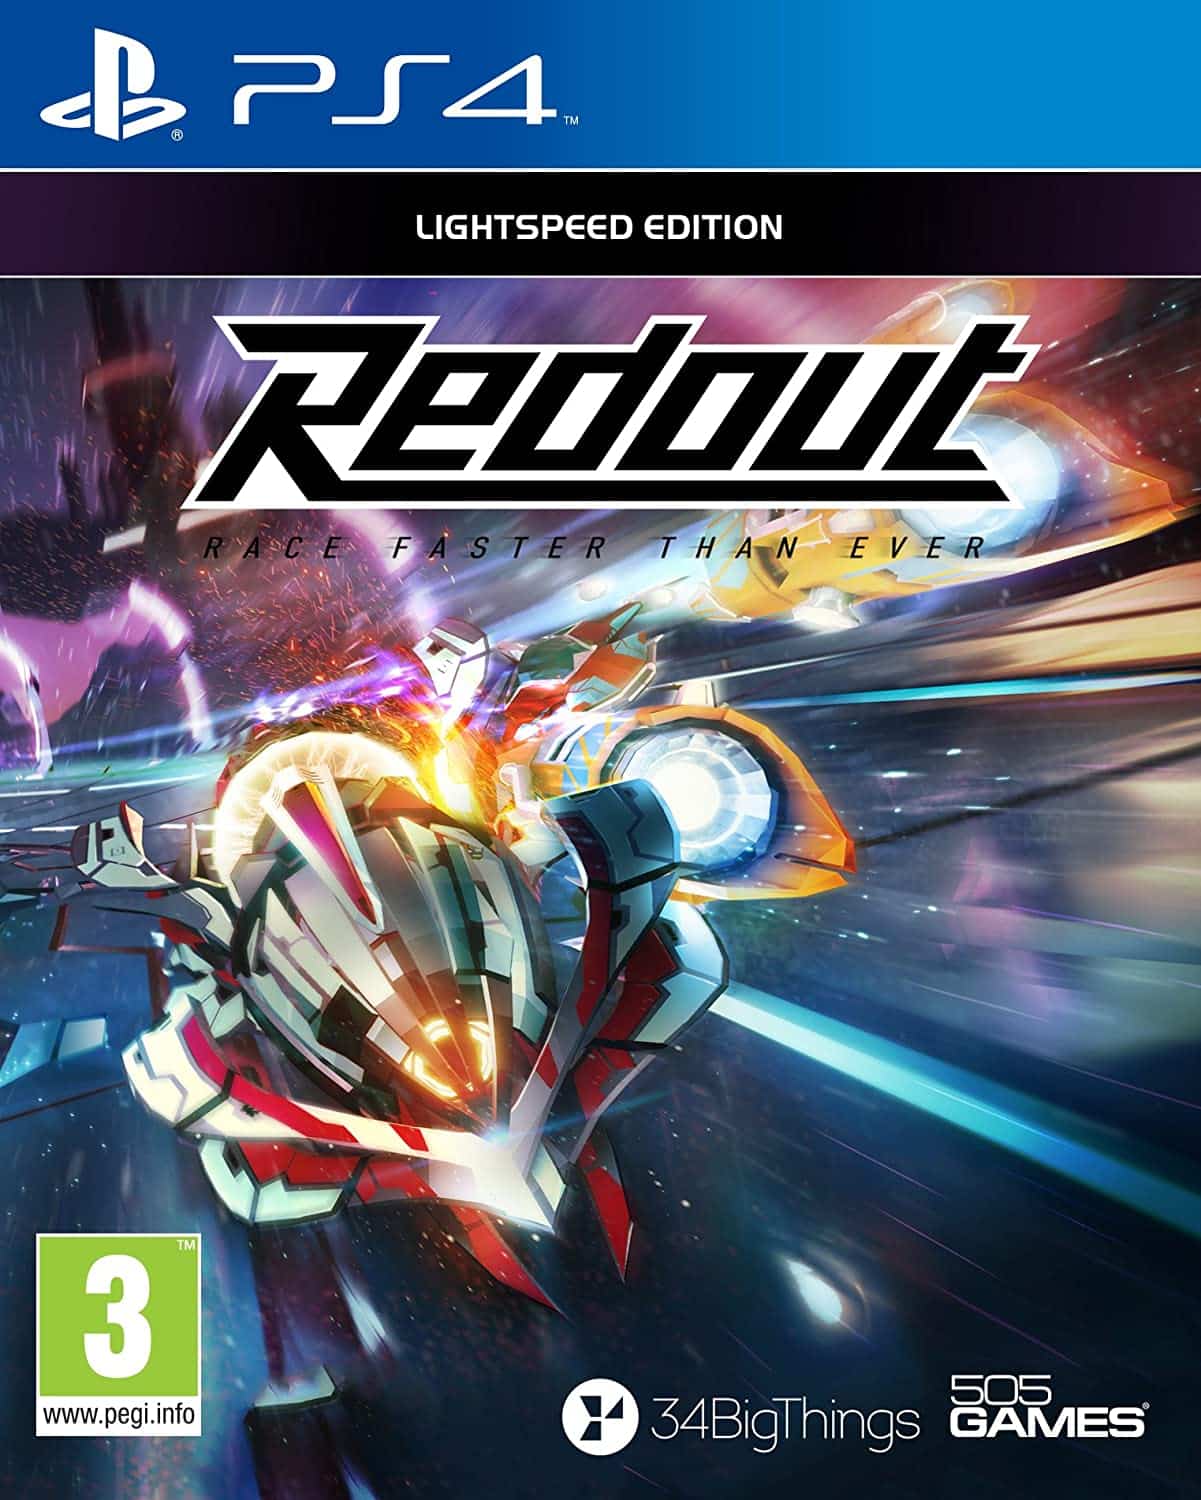 Redout: Lightspeed Edition player count stats